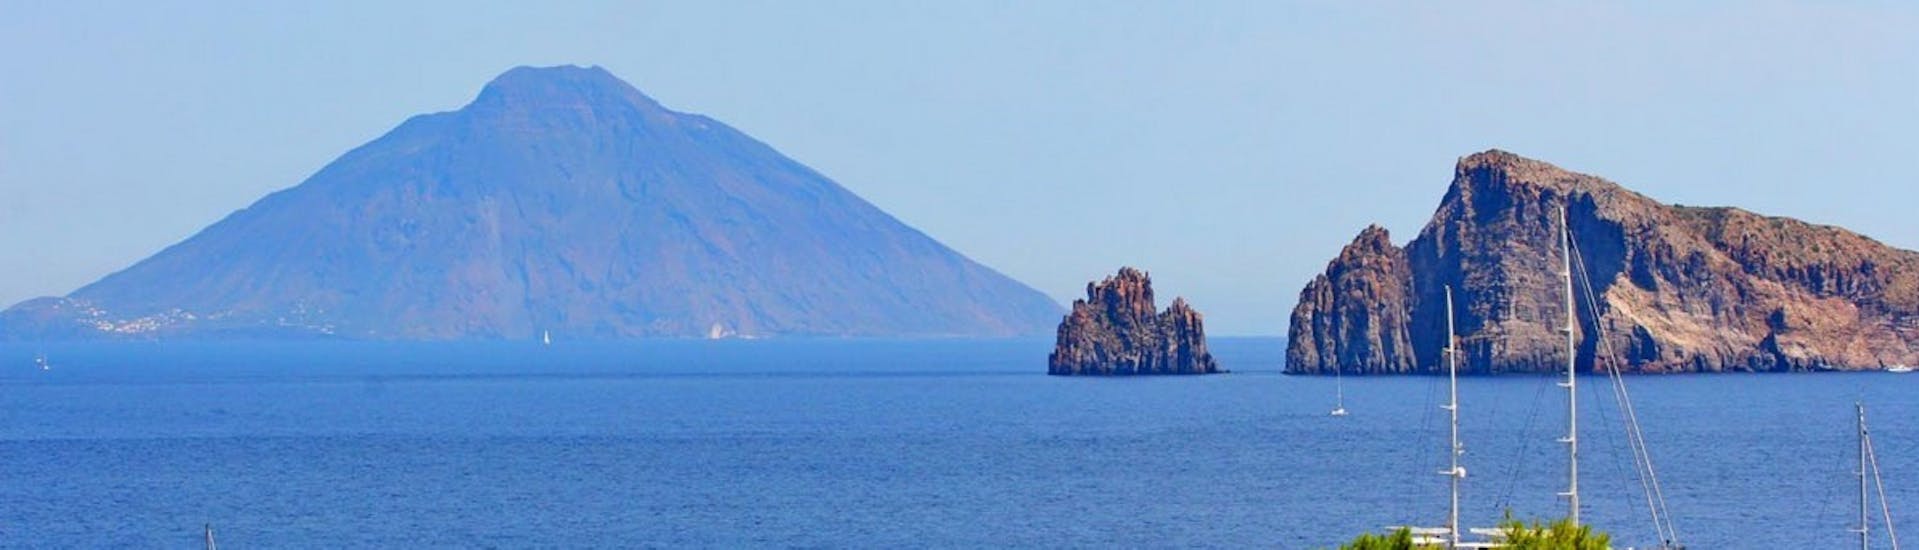 Picture of the Aeolian Islands taken during the Boat Trip to Panarea and Stromboli from Tropea.